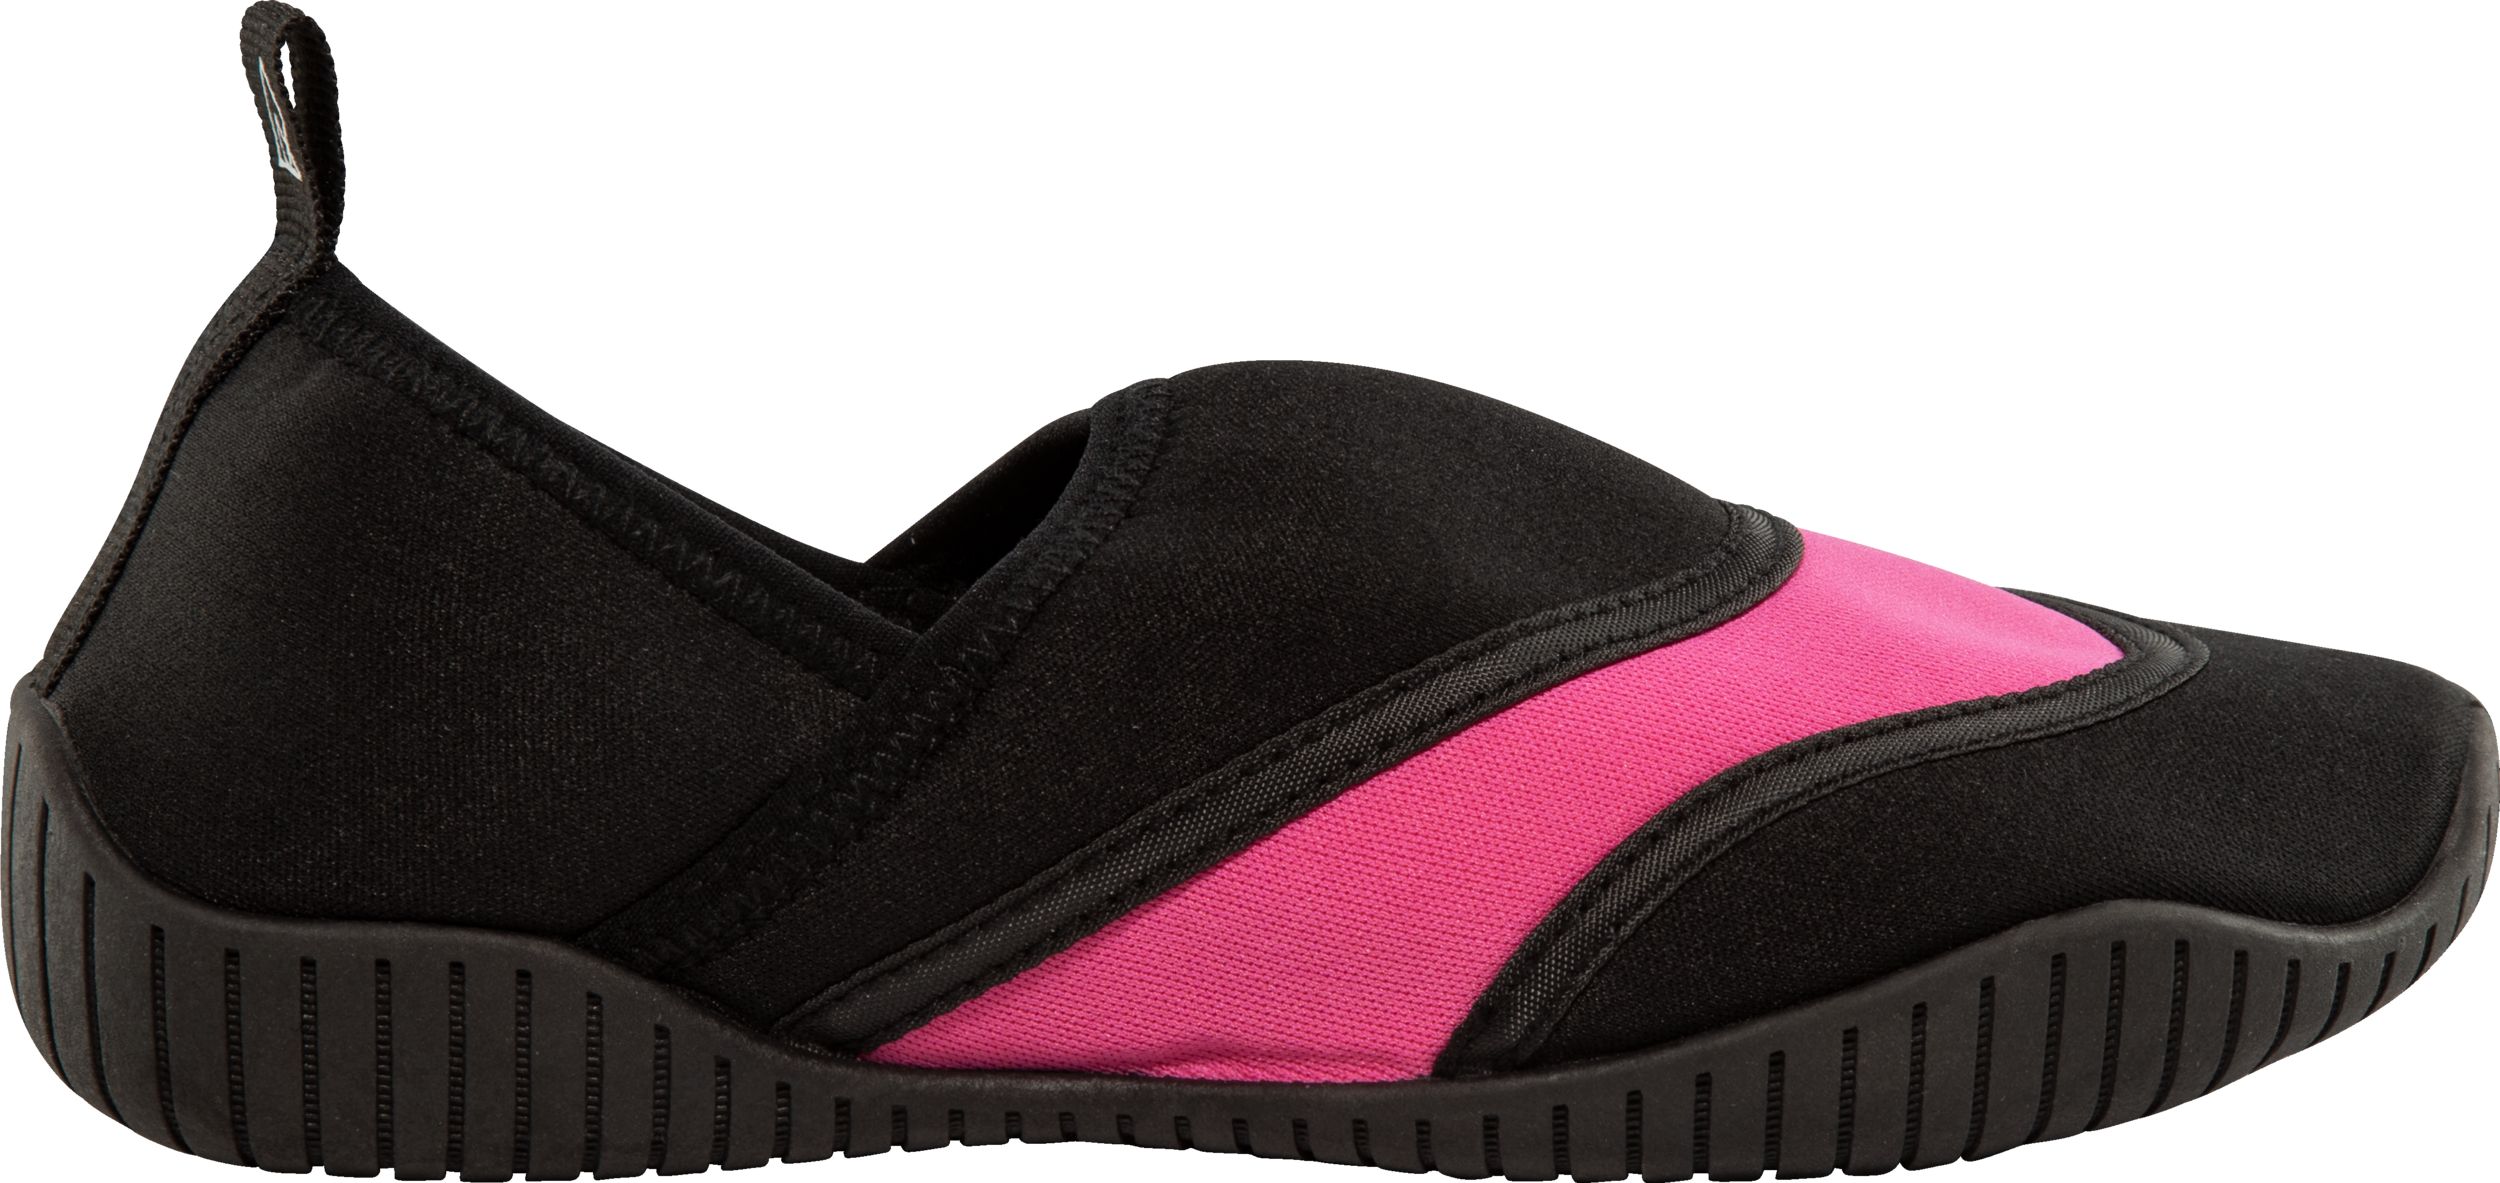 Image of Ripzone Girls' Grade/Pre-School Cove Water Shoes